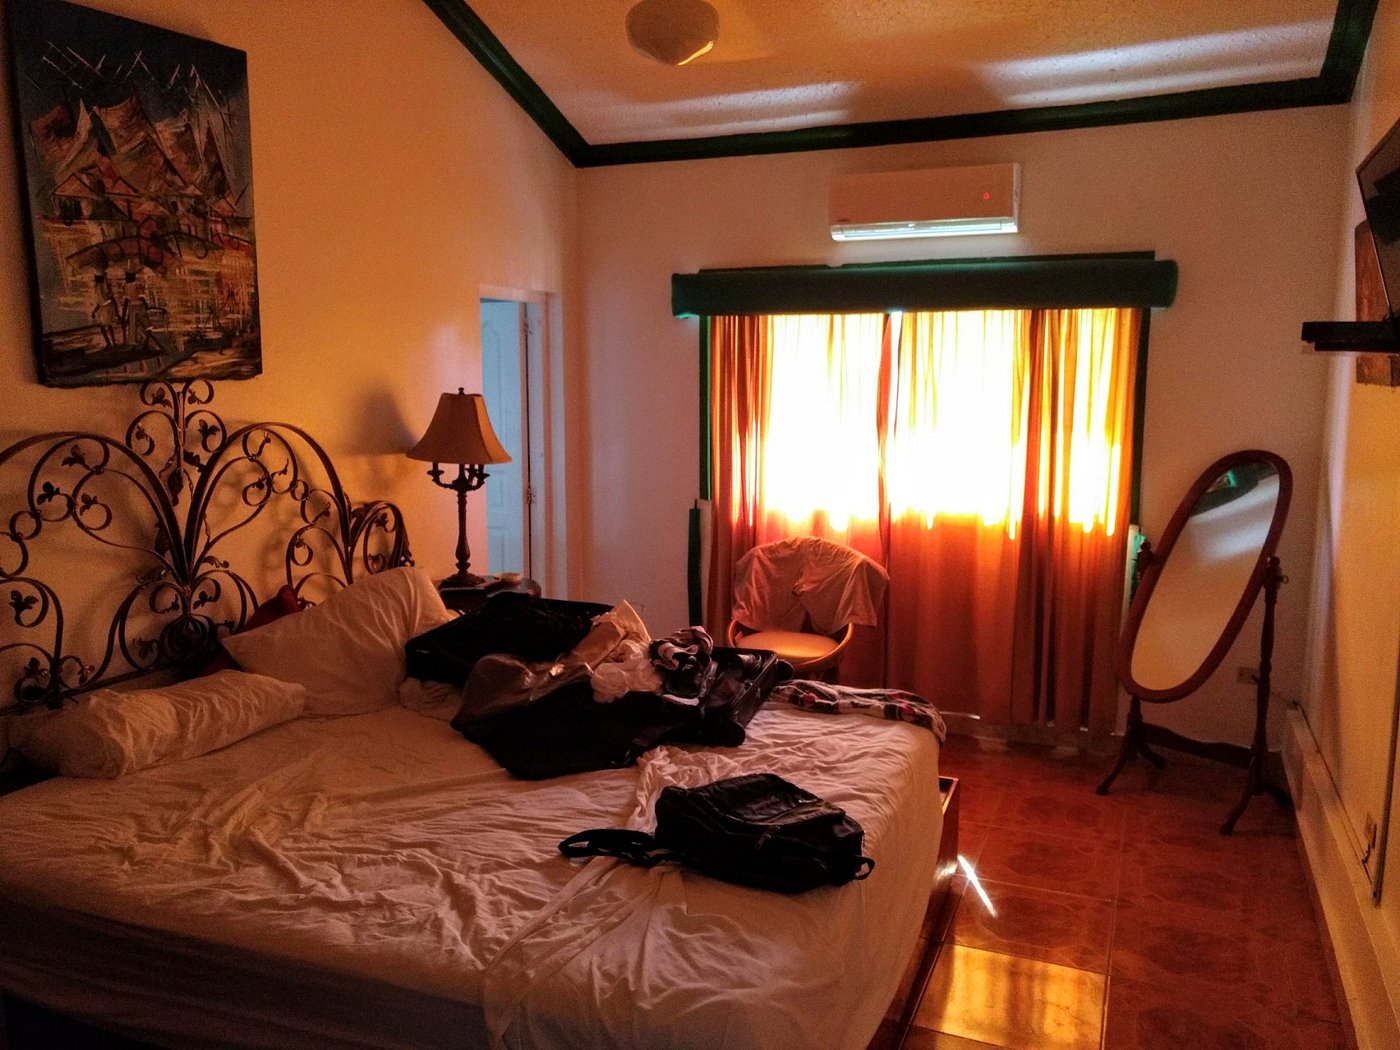 Blackbeards Adult Resort Rooms Pictures And Reviews Tripadvisor